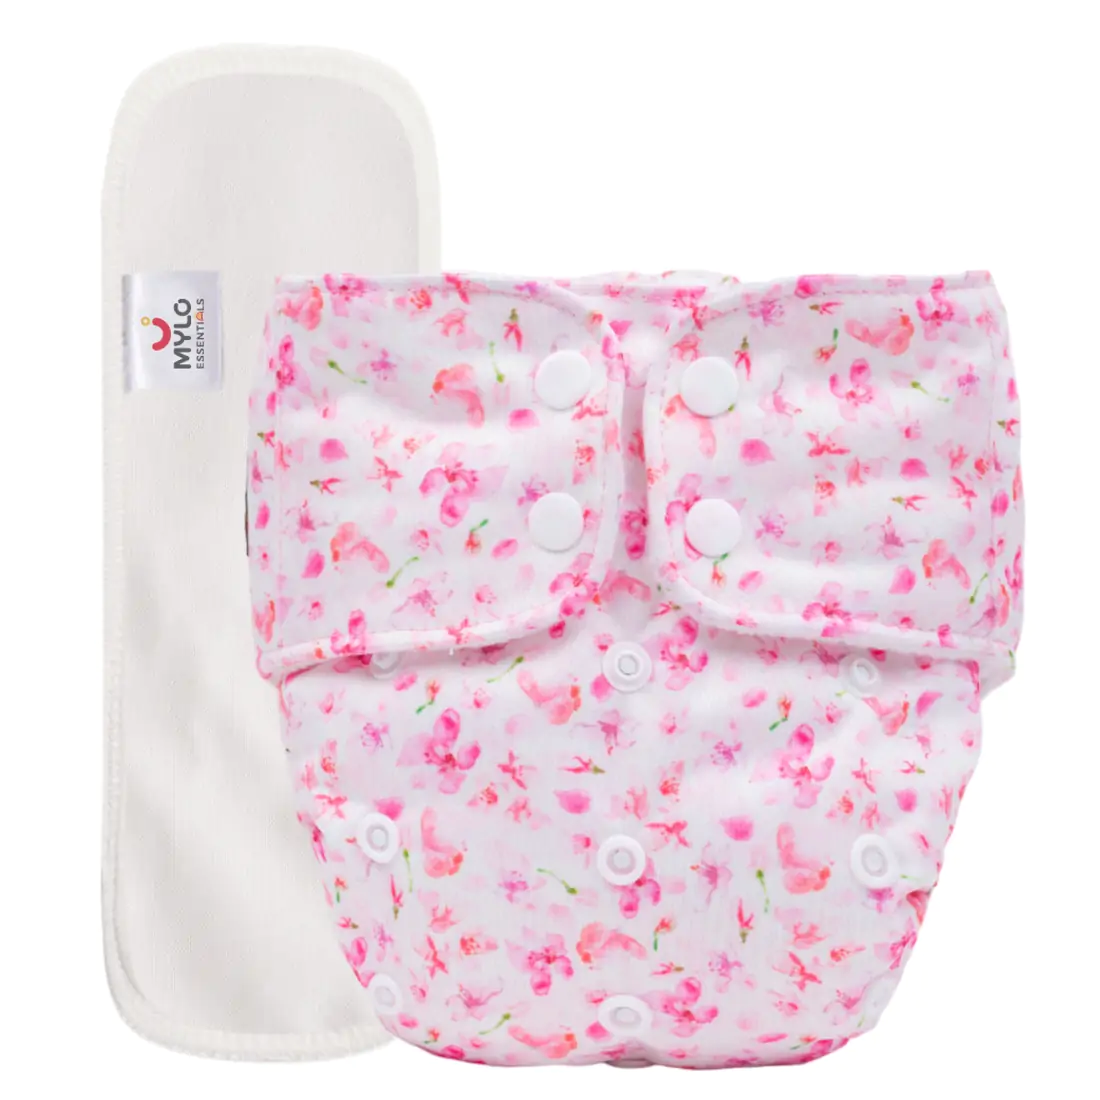 Adjustable Washable & Reusable Top lay Cloth Diaper with SmartCuff Technology for Enhanced Leak Protection-Comes with 1 Dry Feel Absorbent Insert Pad  (3M-3Y)- Cherry Blossom